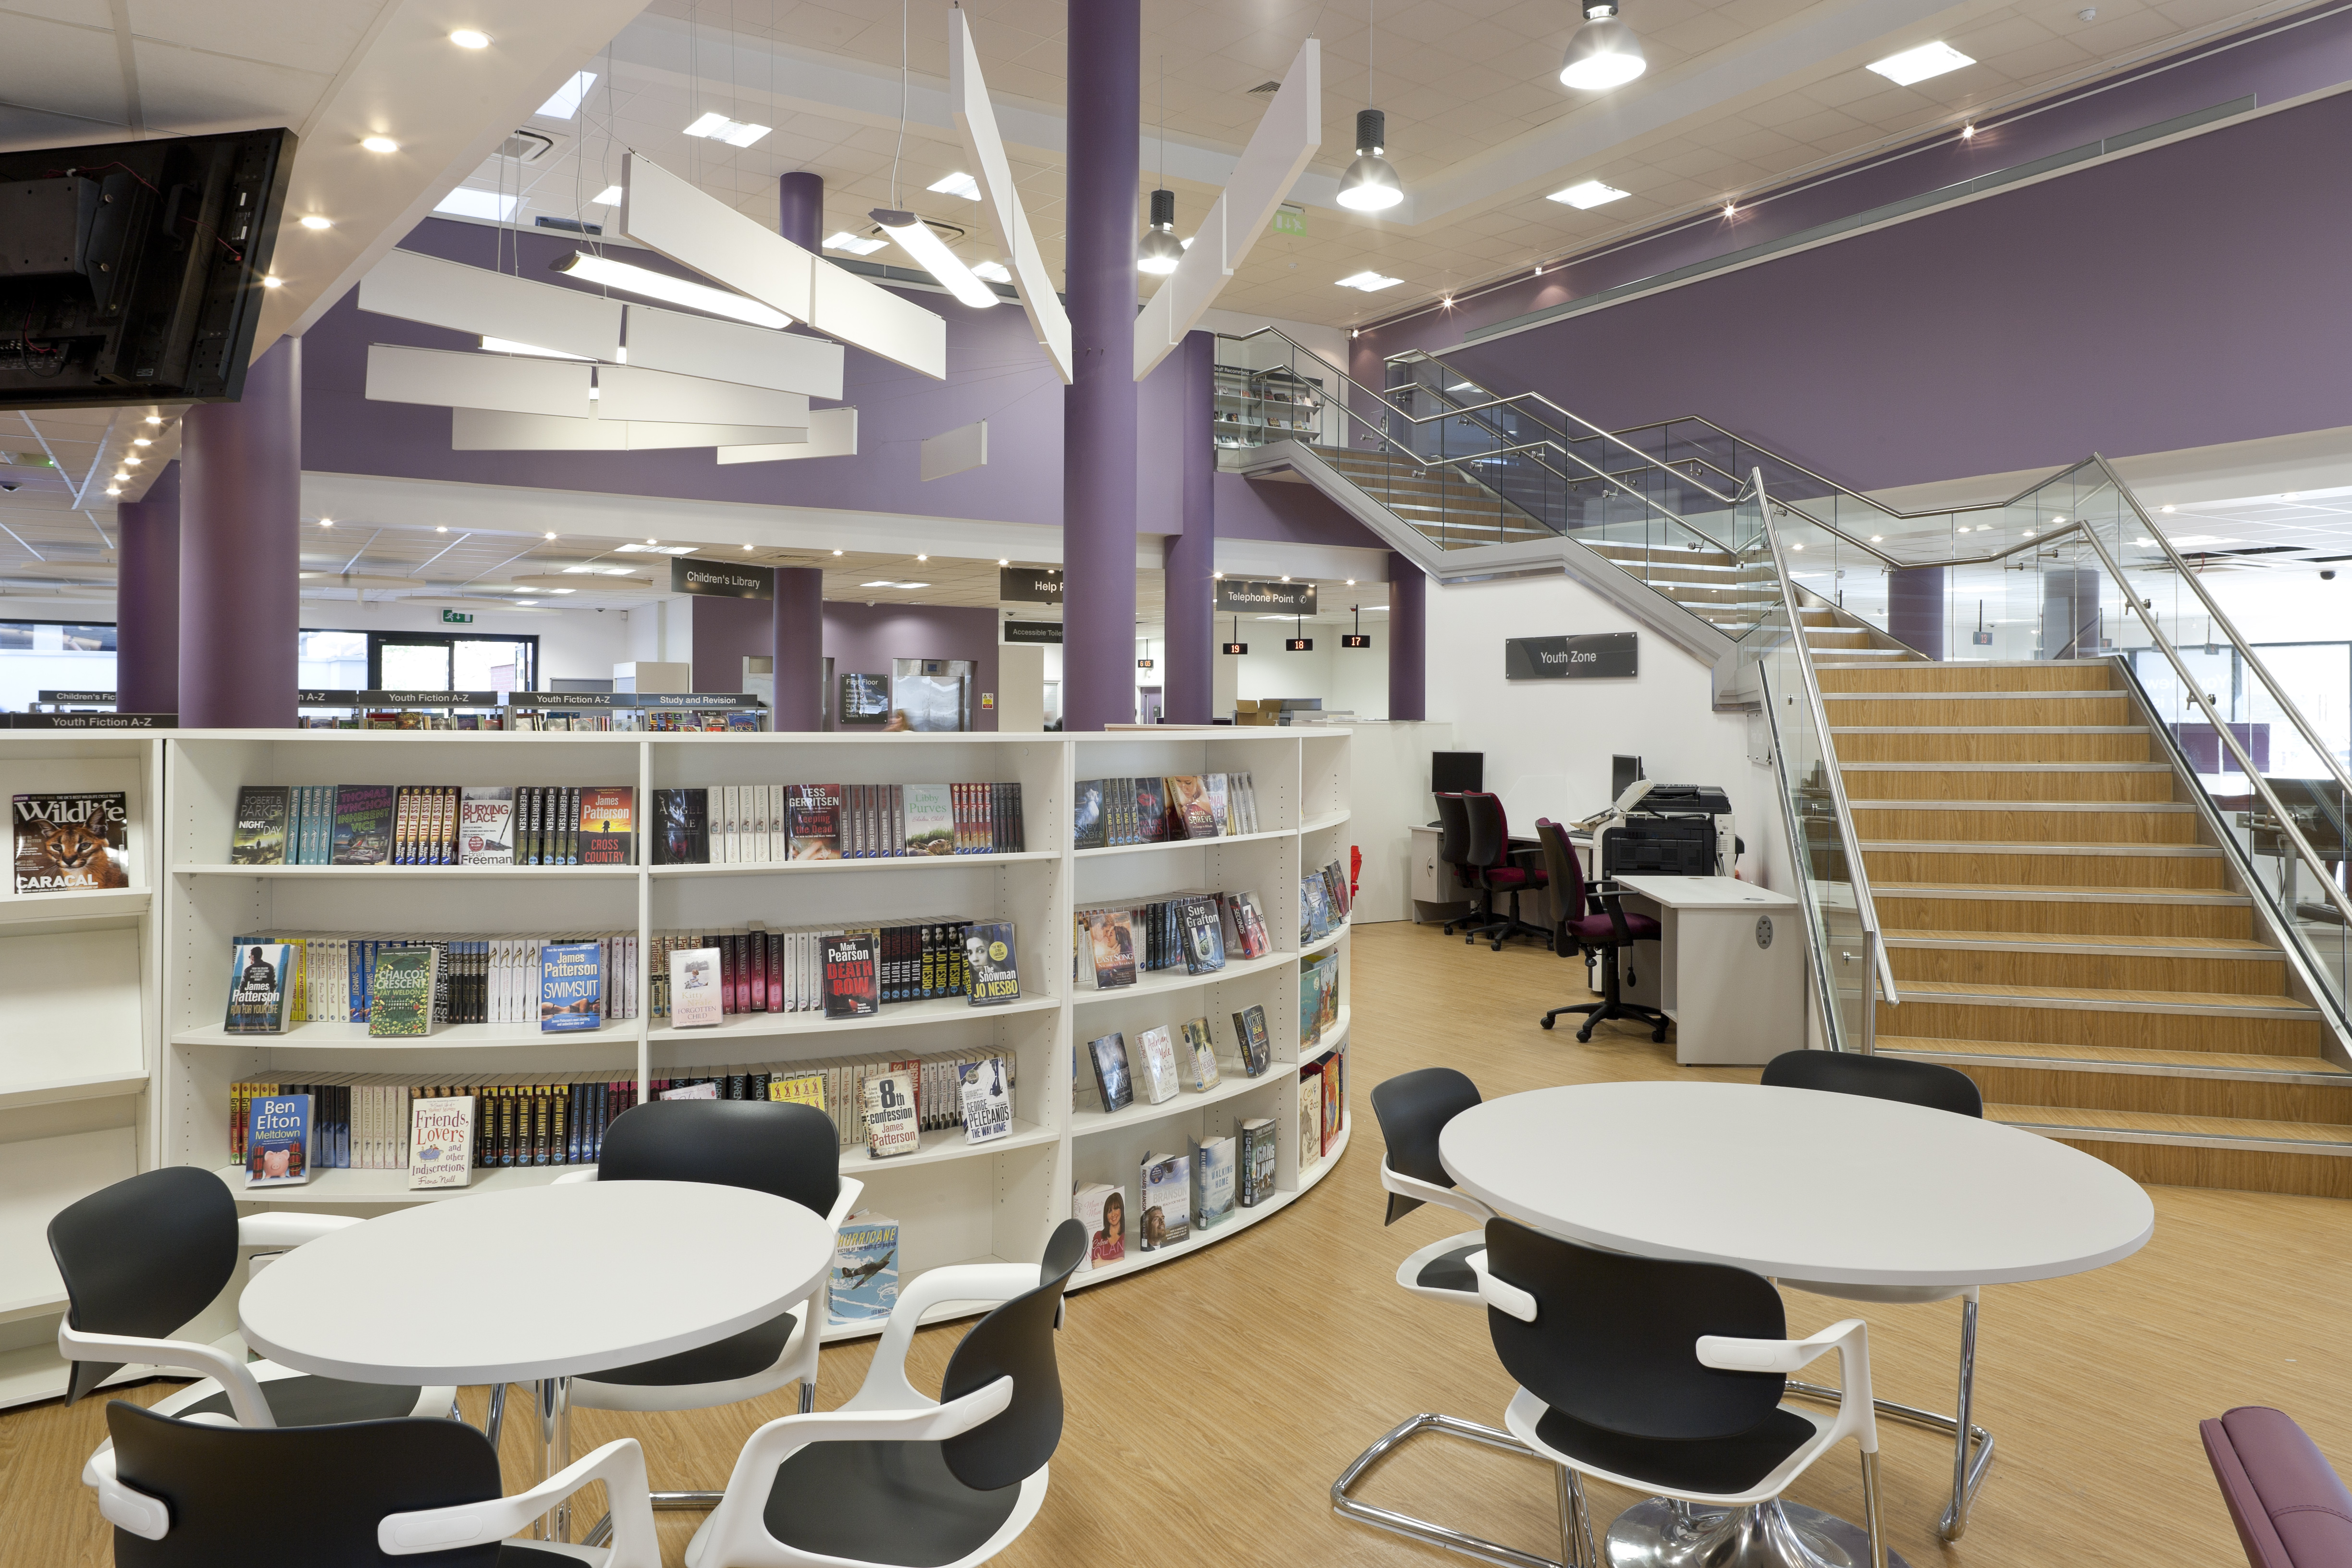 Barking And Dagenham Libraries Move Online During Covid 19 Pandemic Lbbd